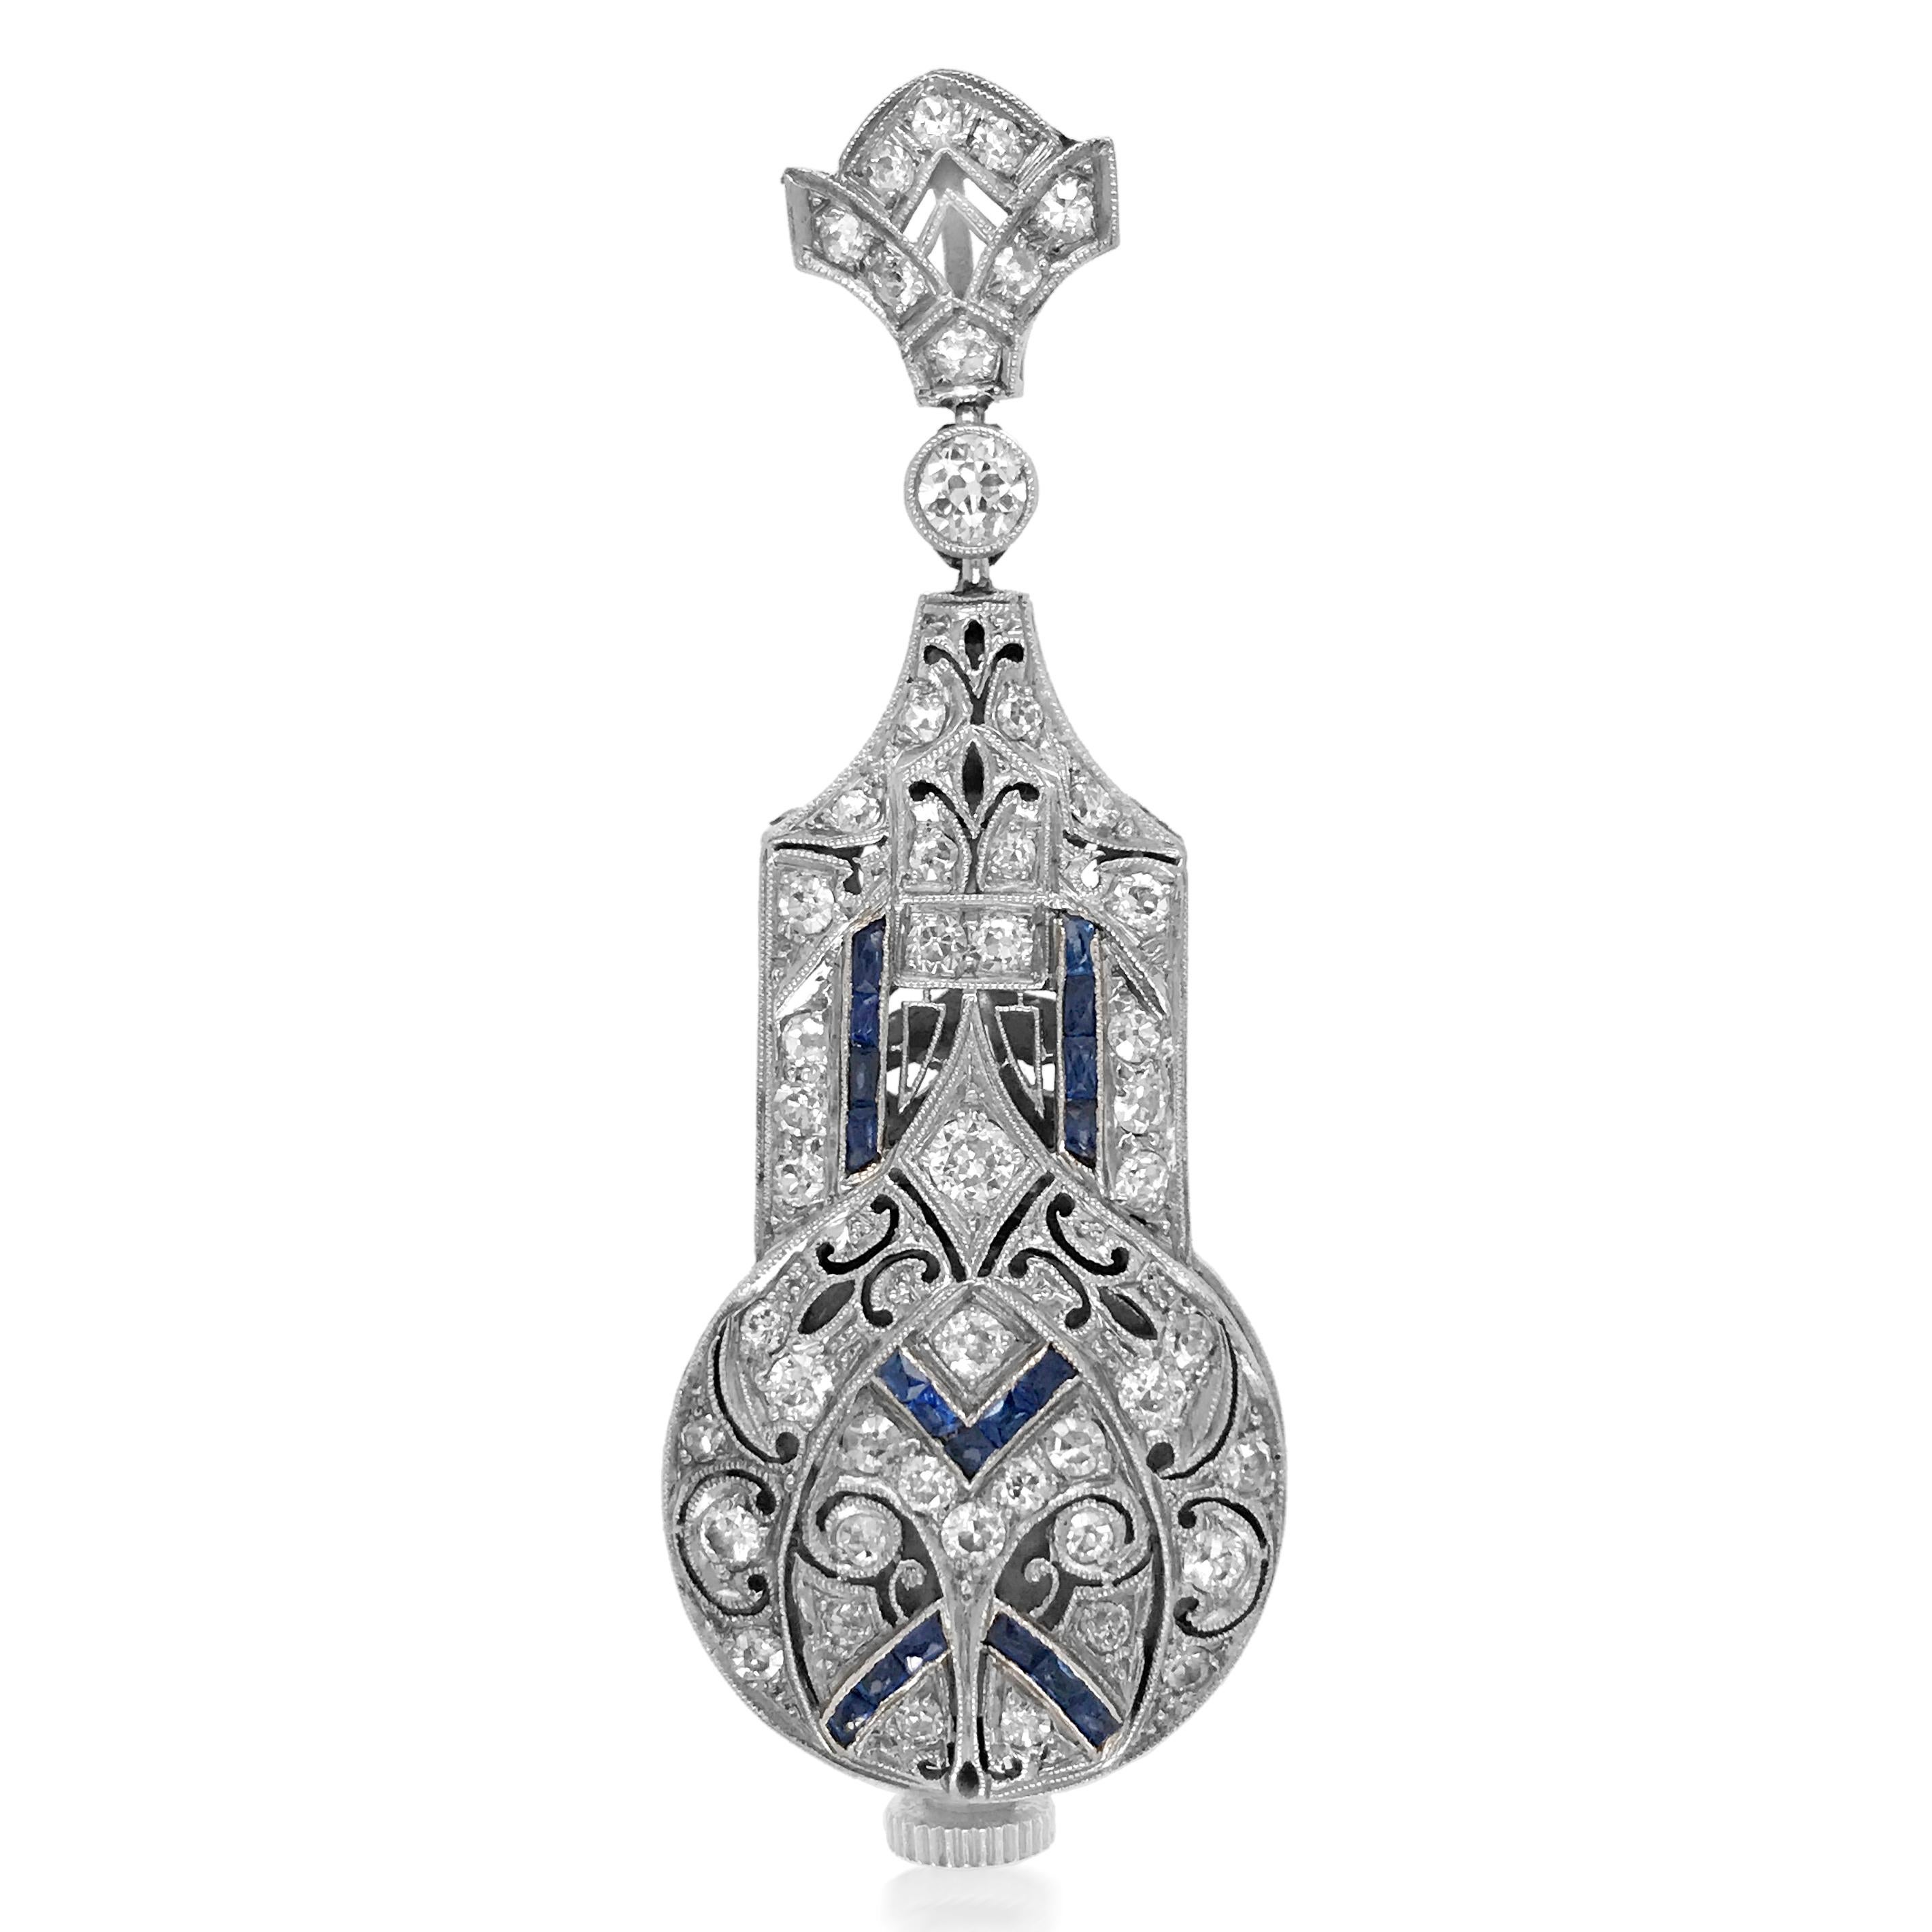 This enchanting, meticulously made diamond and sapphire pendant watch is an elegant choice for all occasions, handcrafted in solid platinum, weighs 14.92 grams and measures 55x24 mm. The front is adorned with approx. 1.0ct old-European cut diamonds